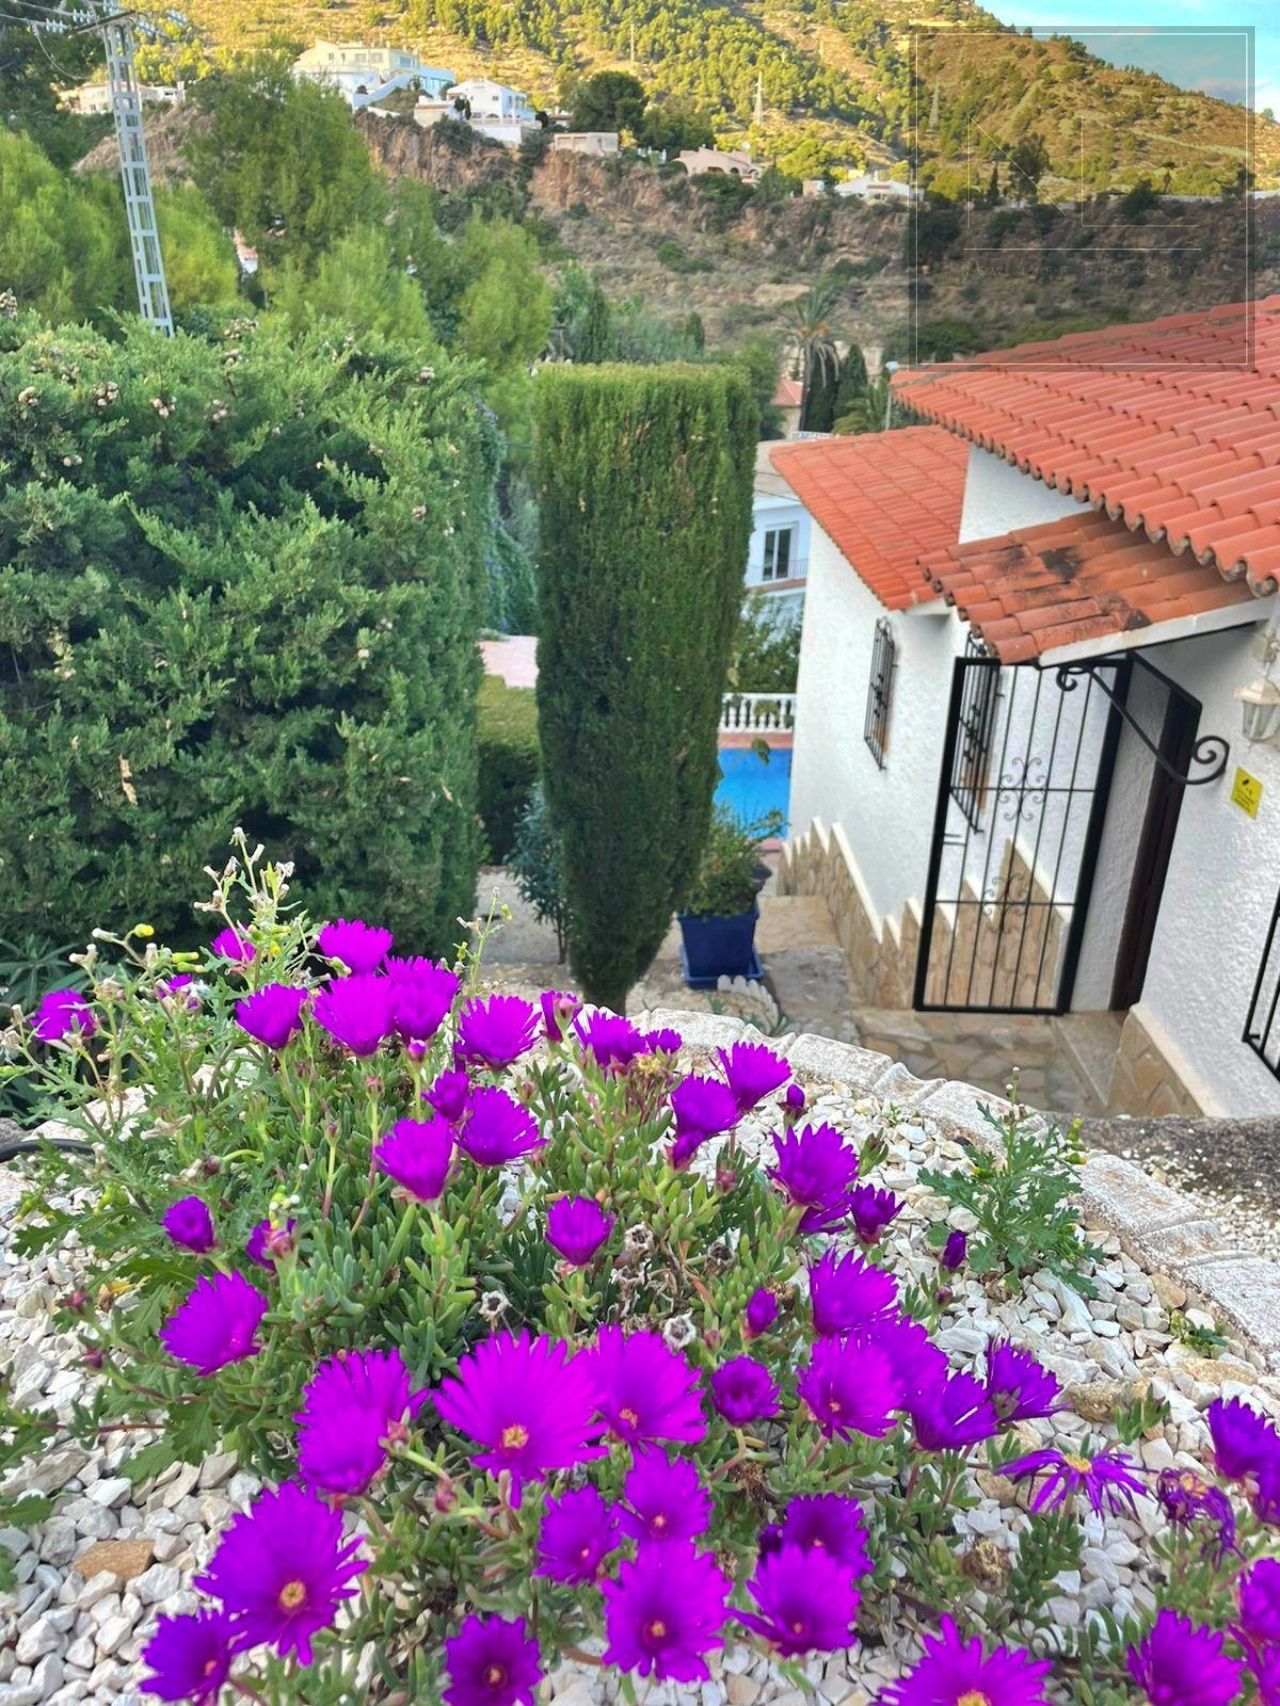 Detached Villa For Sale in Calpe